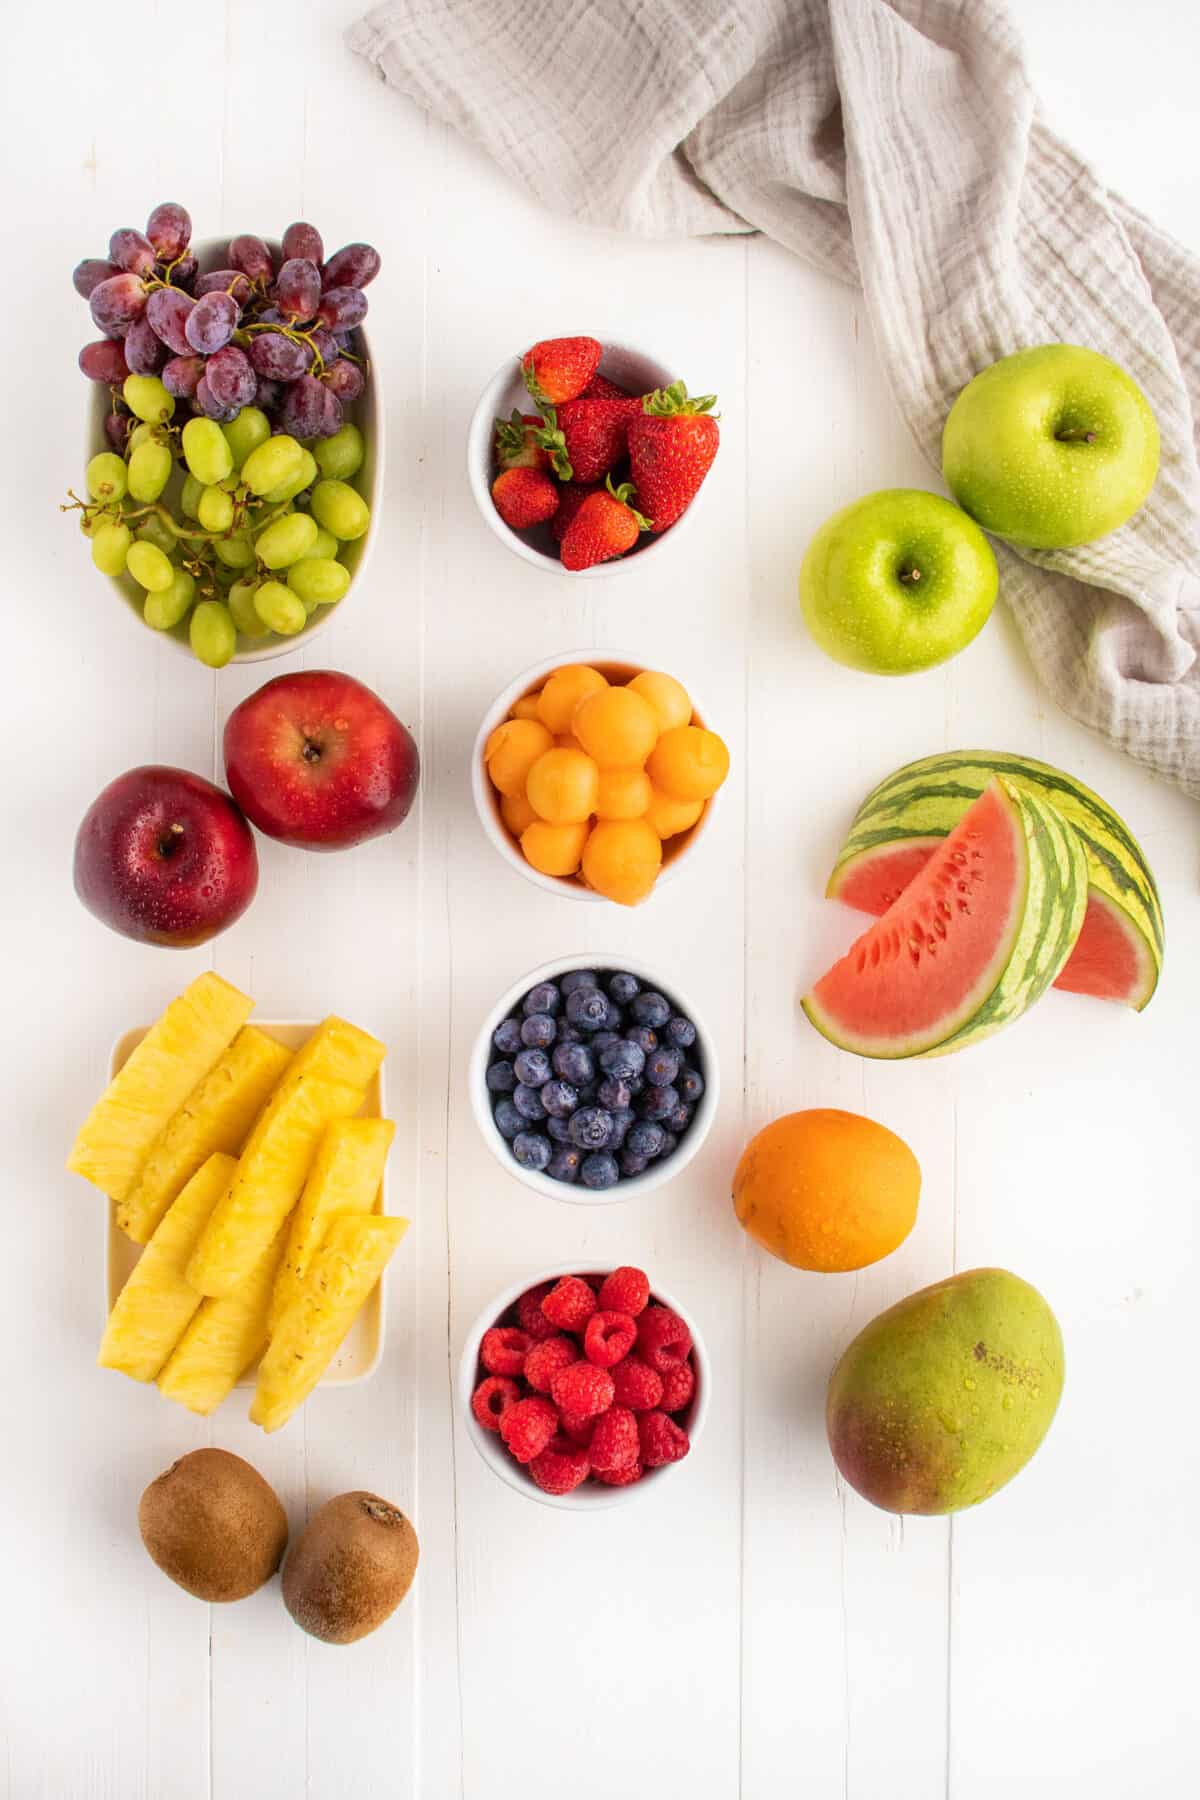 types of fruit for a fruit platter, raspberries, blueberries, grapes, apples, watermelon, oranges, mangoes, pineapple and kiwis 